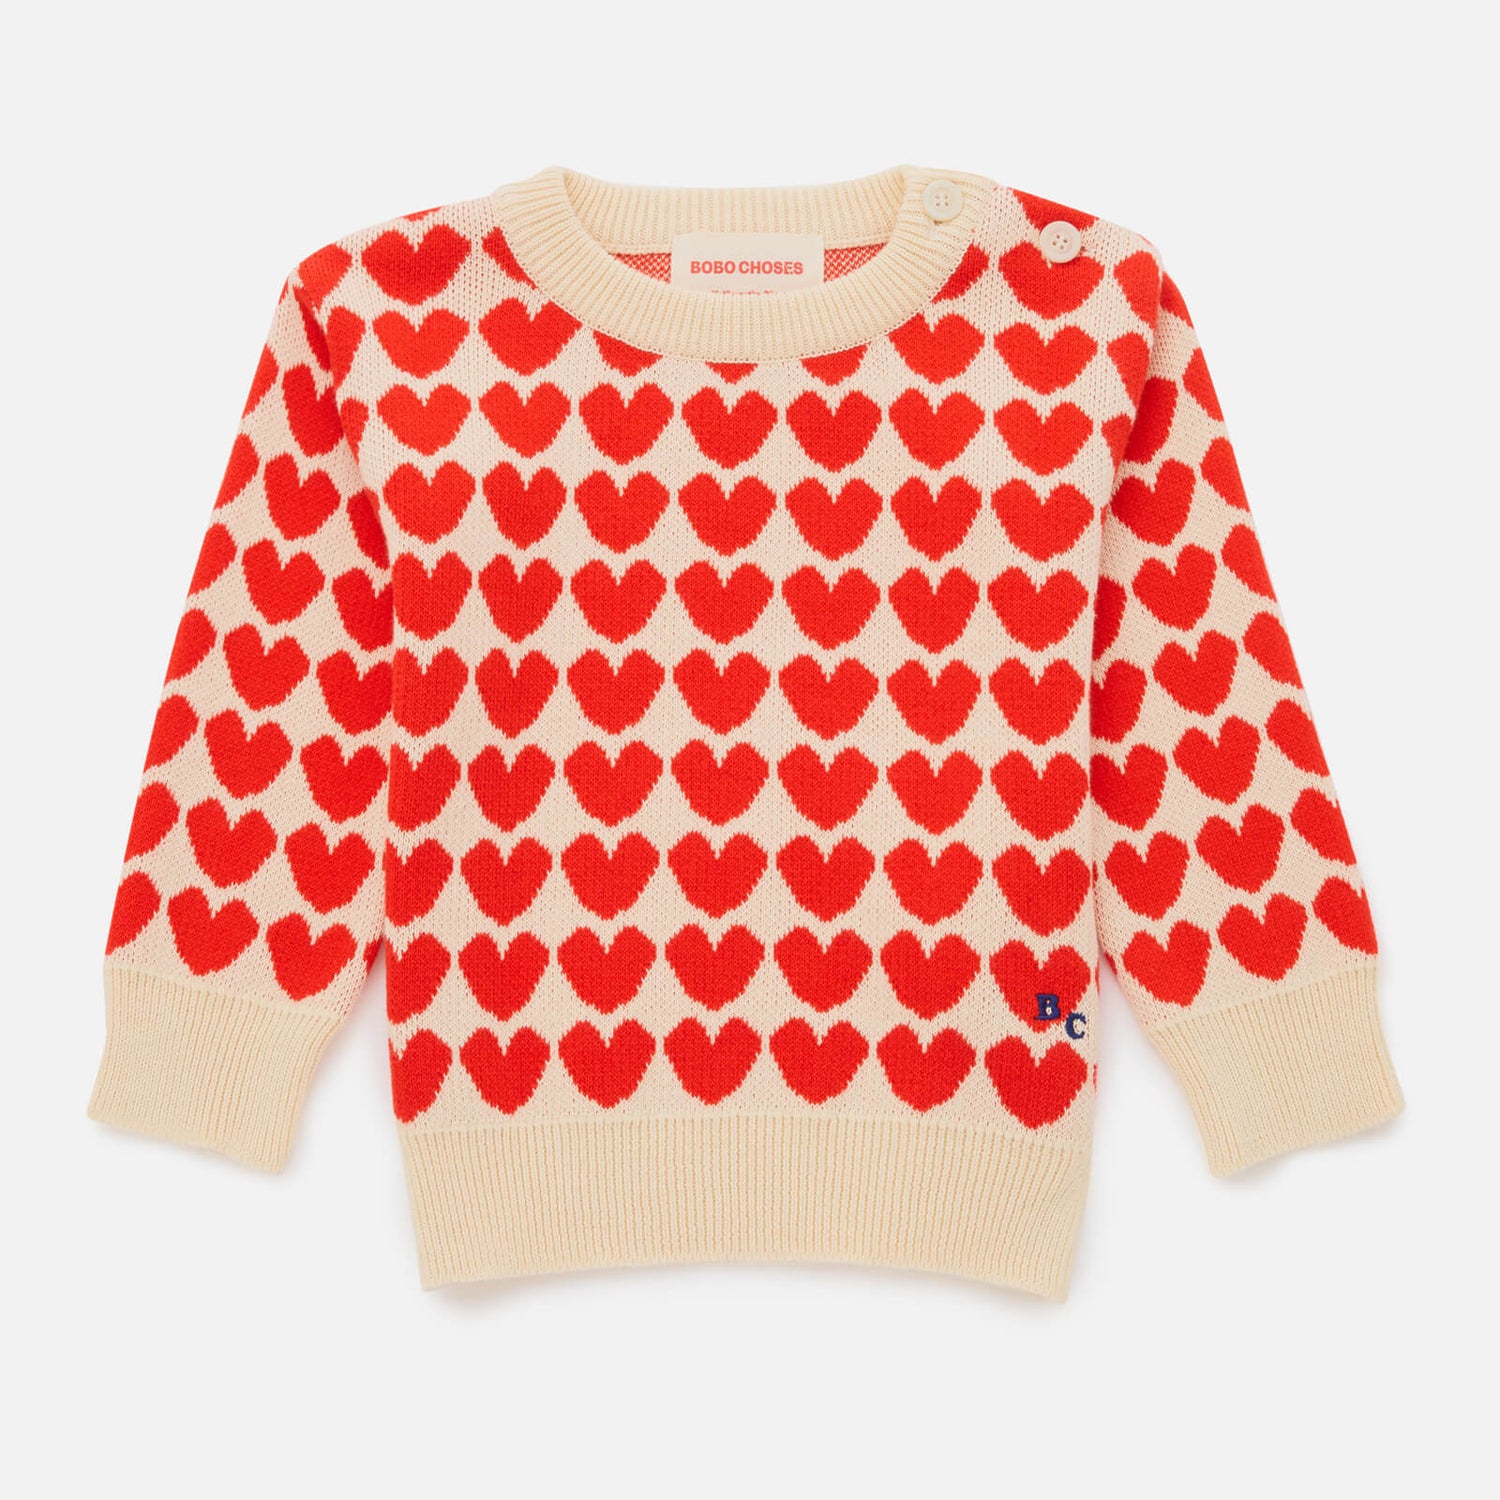 BoBo Choses Baby’s Hearts Cotton Jacquard Jumper - 3-6 months